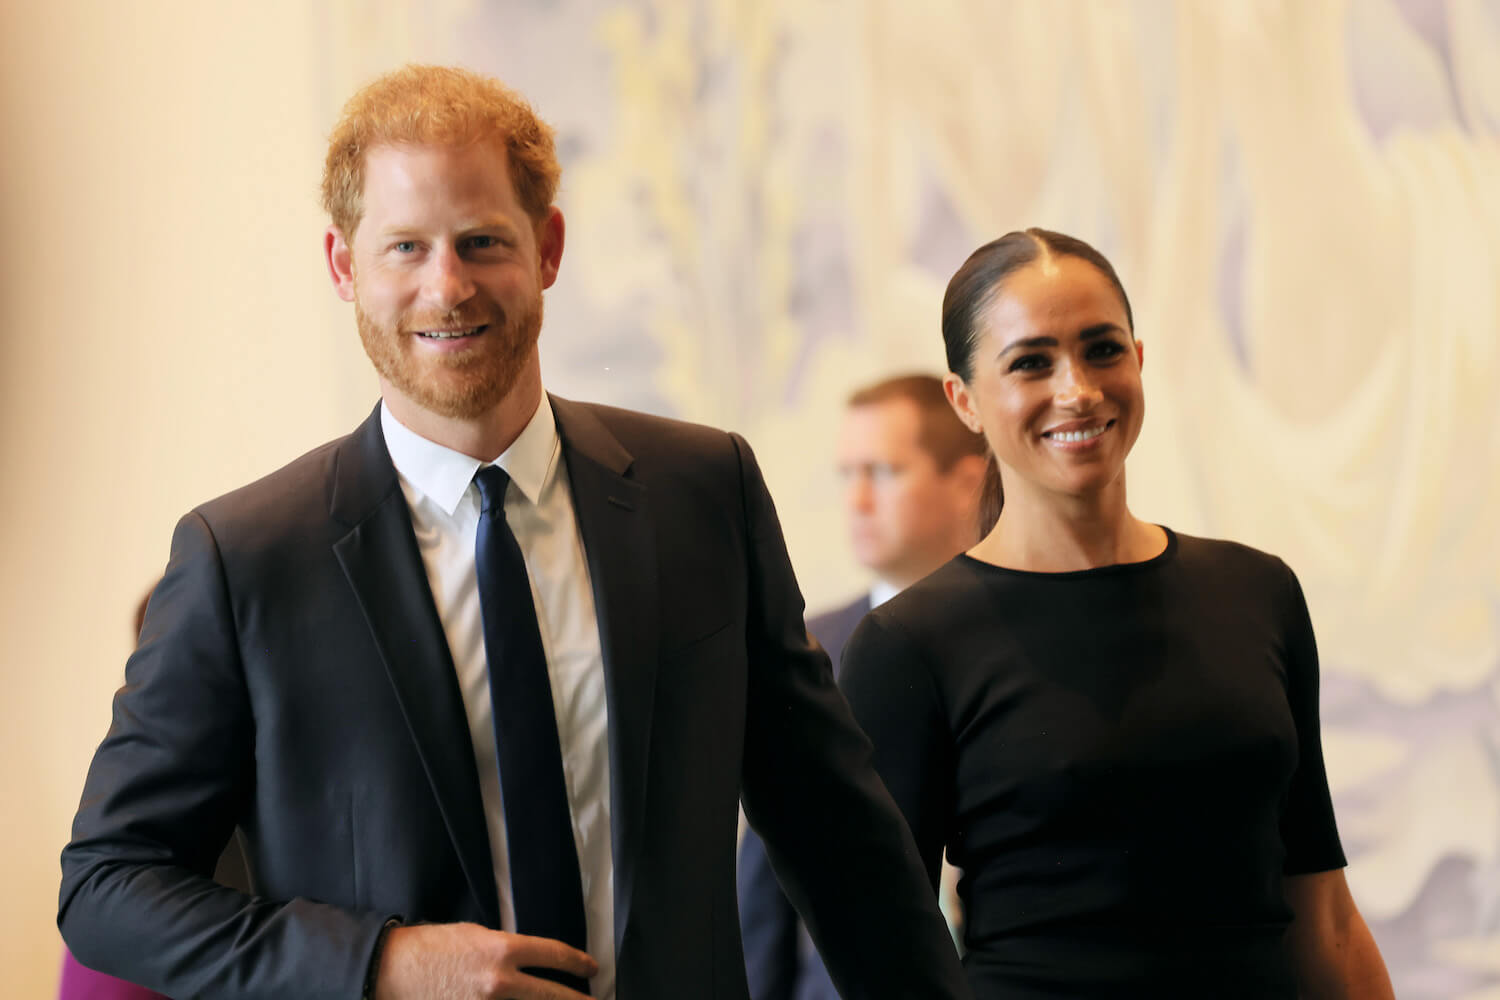 Prince Harry and Meghan Markle Coronation No-Show Could Be ‘Fatal, Irreversible Blow’ to Royal Family, Expert Warns